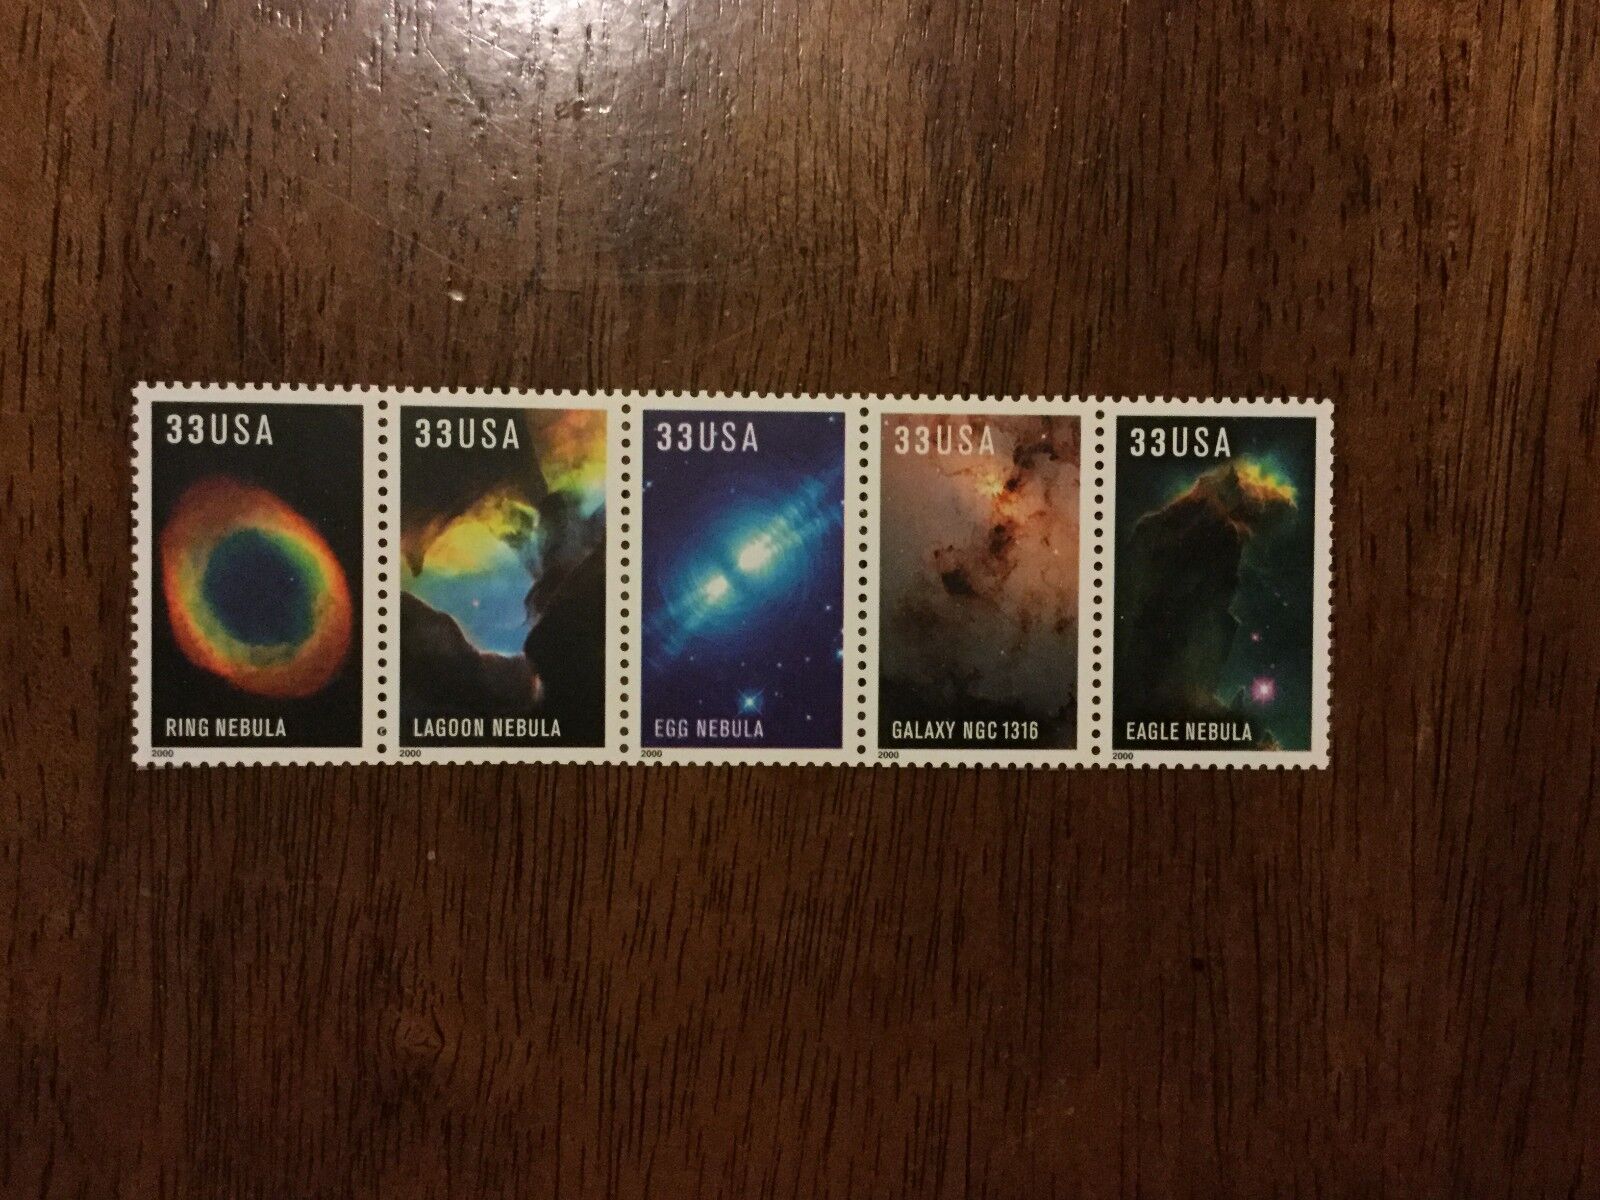 US 3384-3388 HUBBLE SPACE TELESCOPE strip of 5 MNH